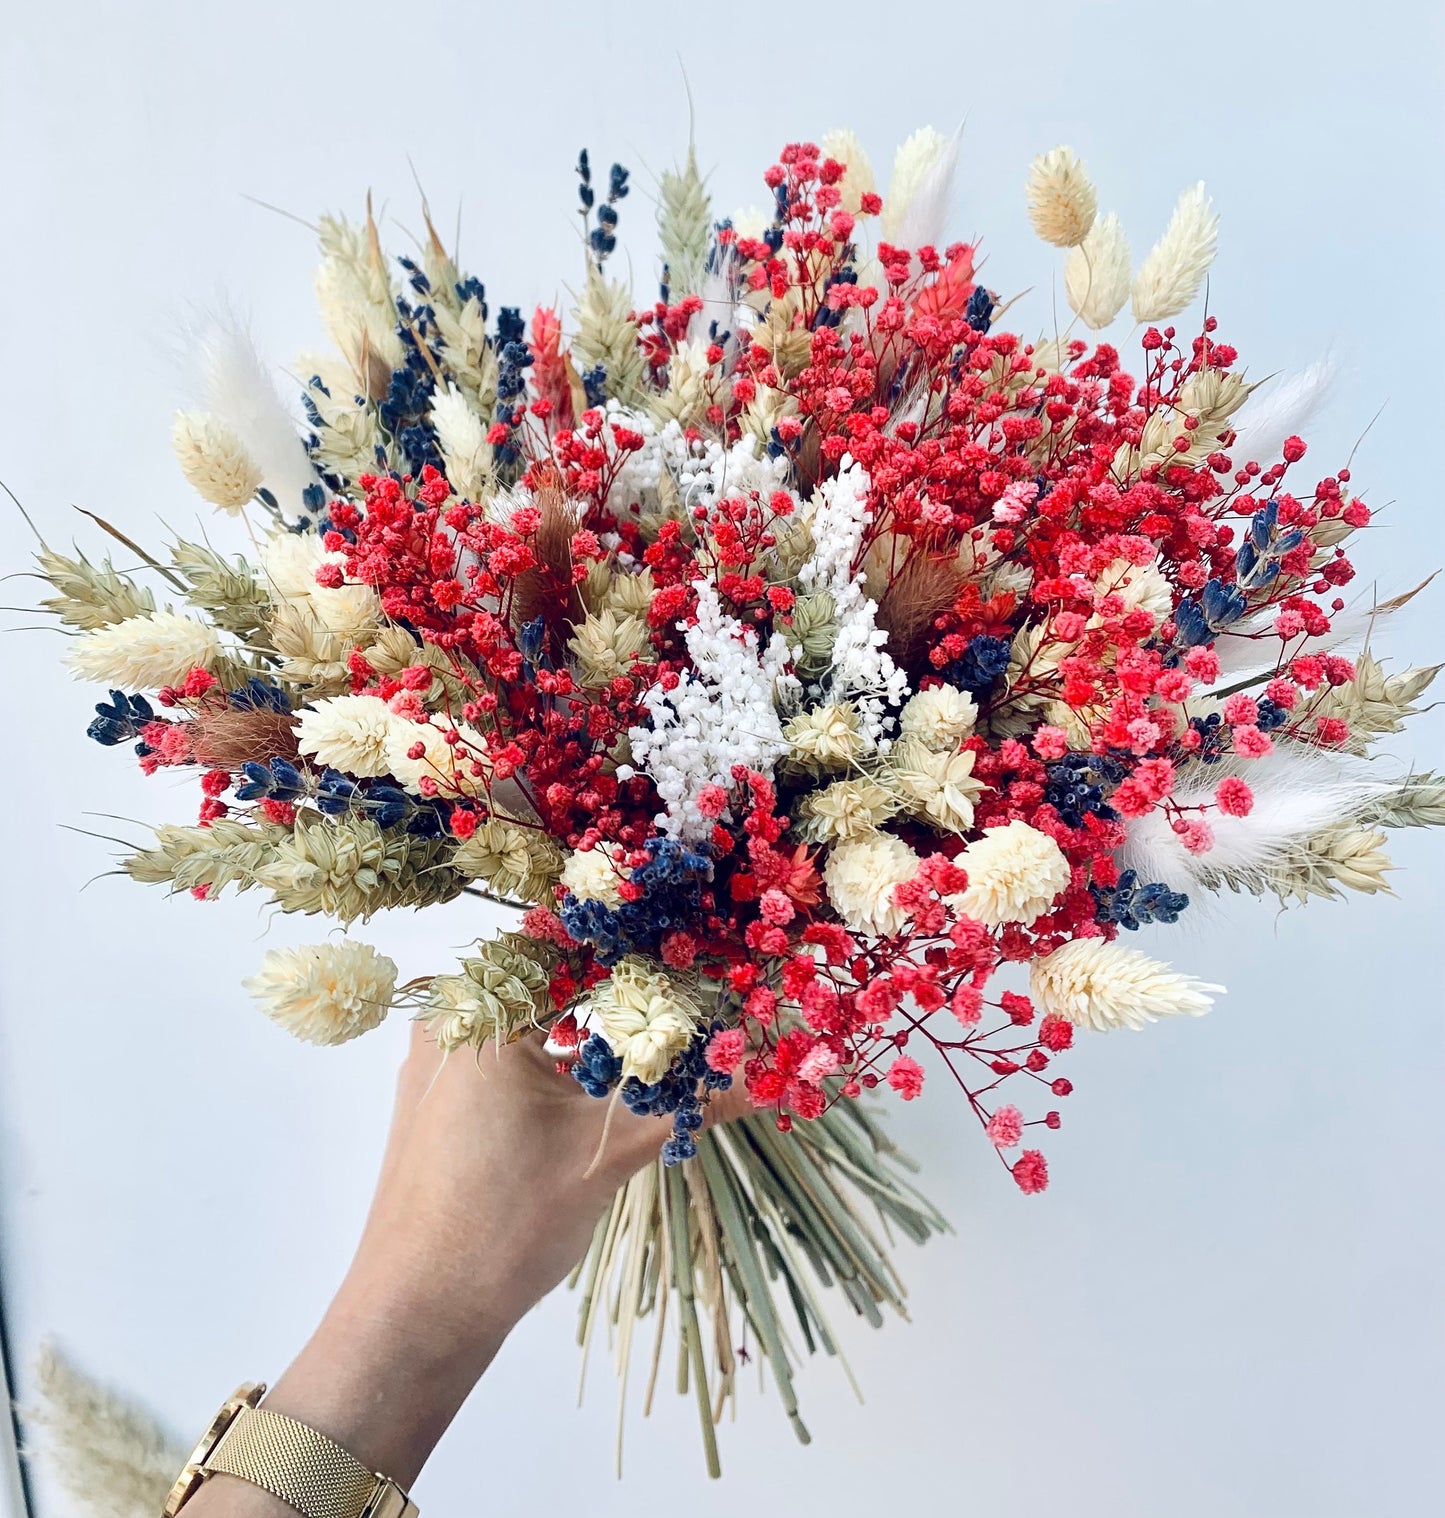 Scented BERRY Bouquet / Dried Flowers/ Dried Flower Bouquet/ Valentines Bouquet / Dried flower arrangement / Gift for her / Bridal bouquet